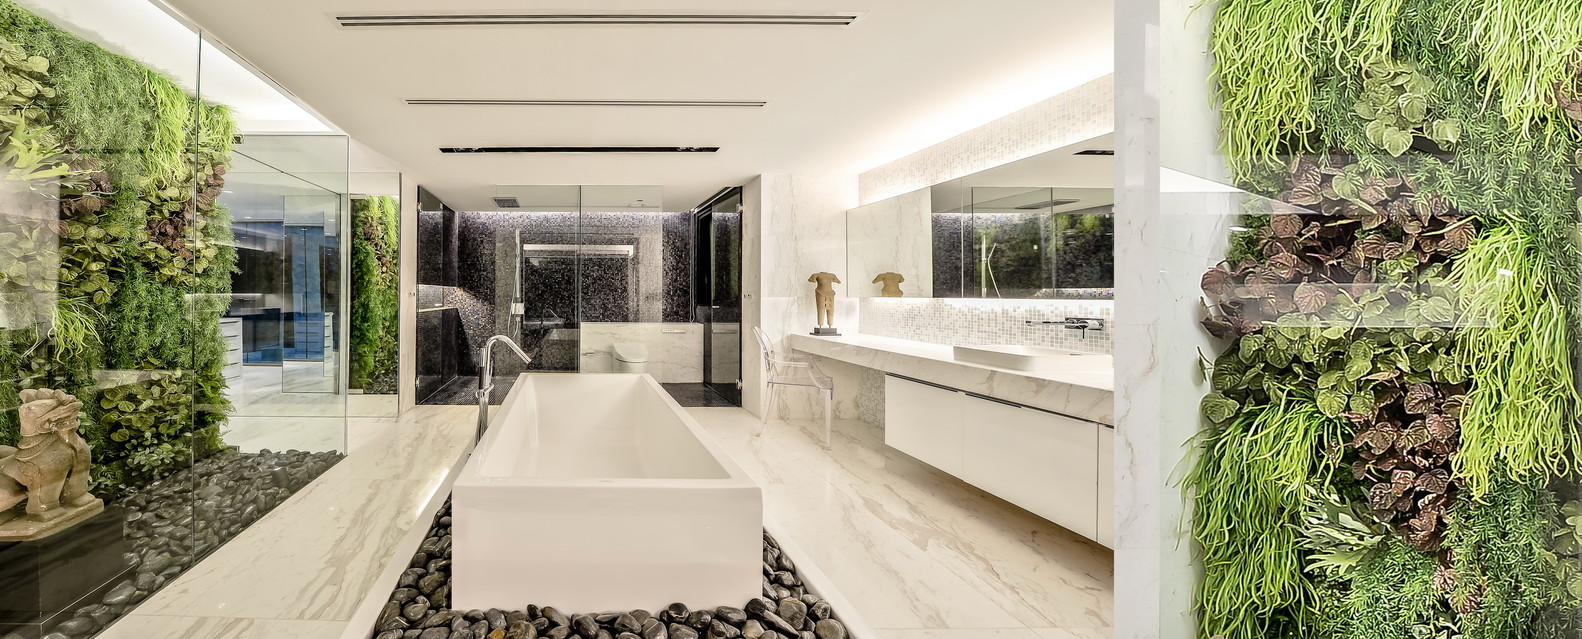 TOPDESIGN_Penthouse_Pano_12_L2_Master_Bathroom1a